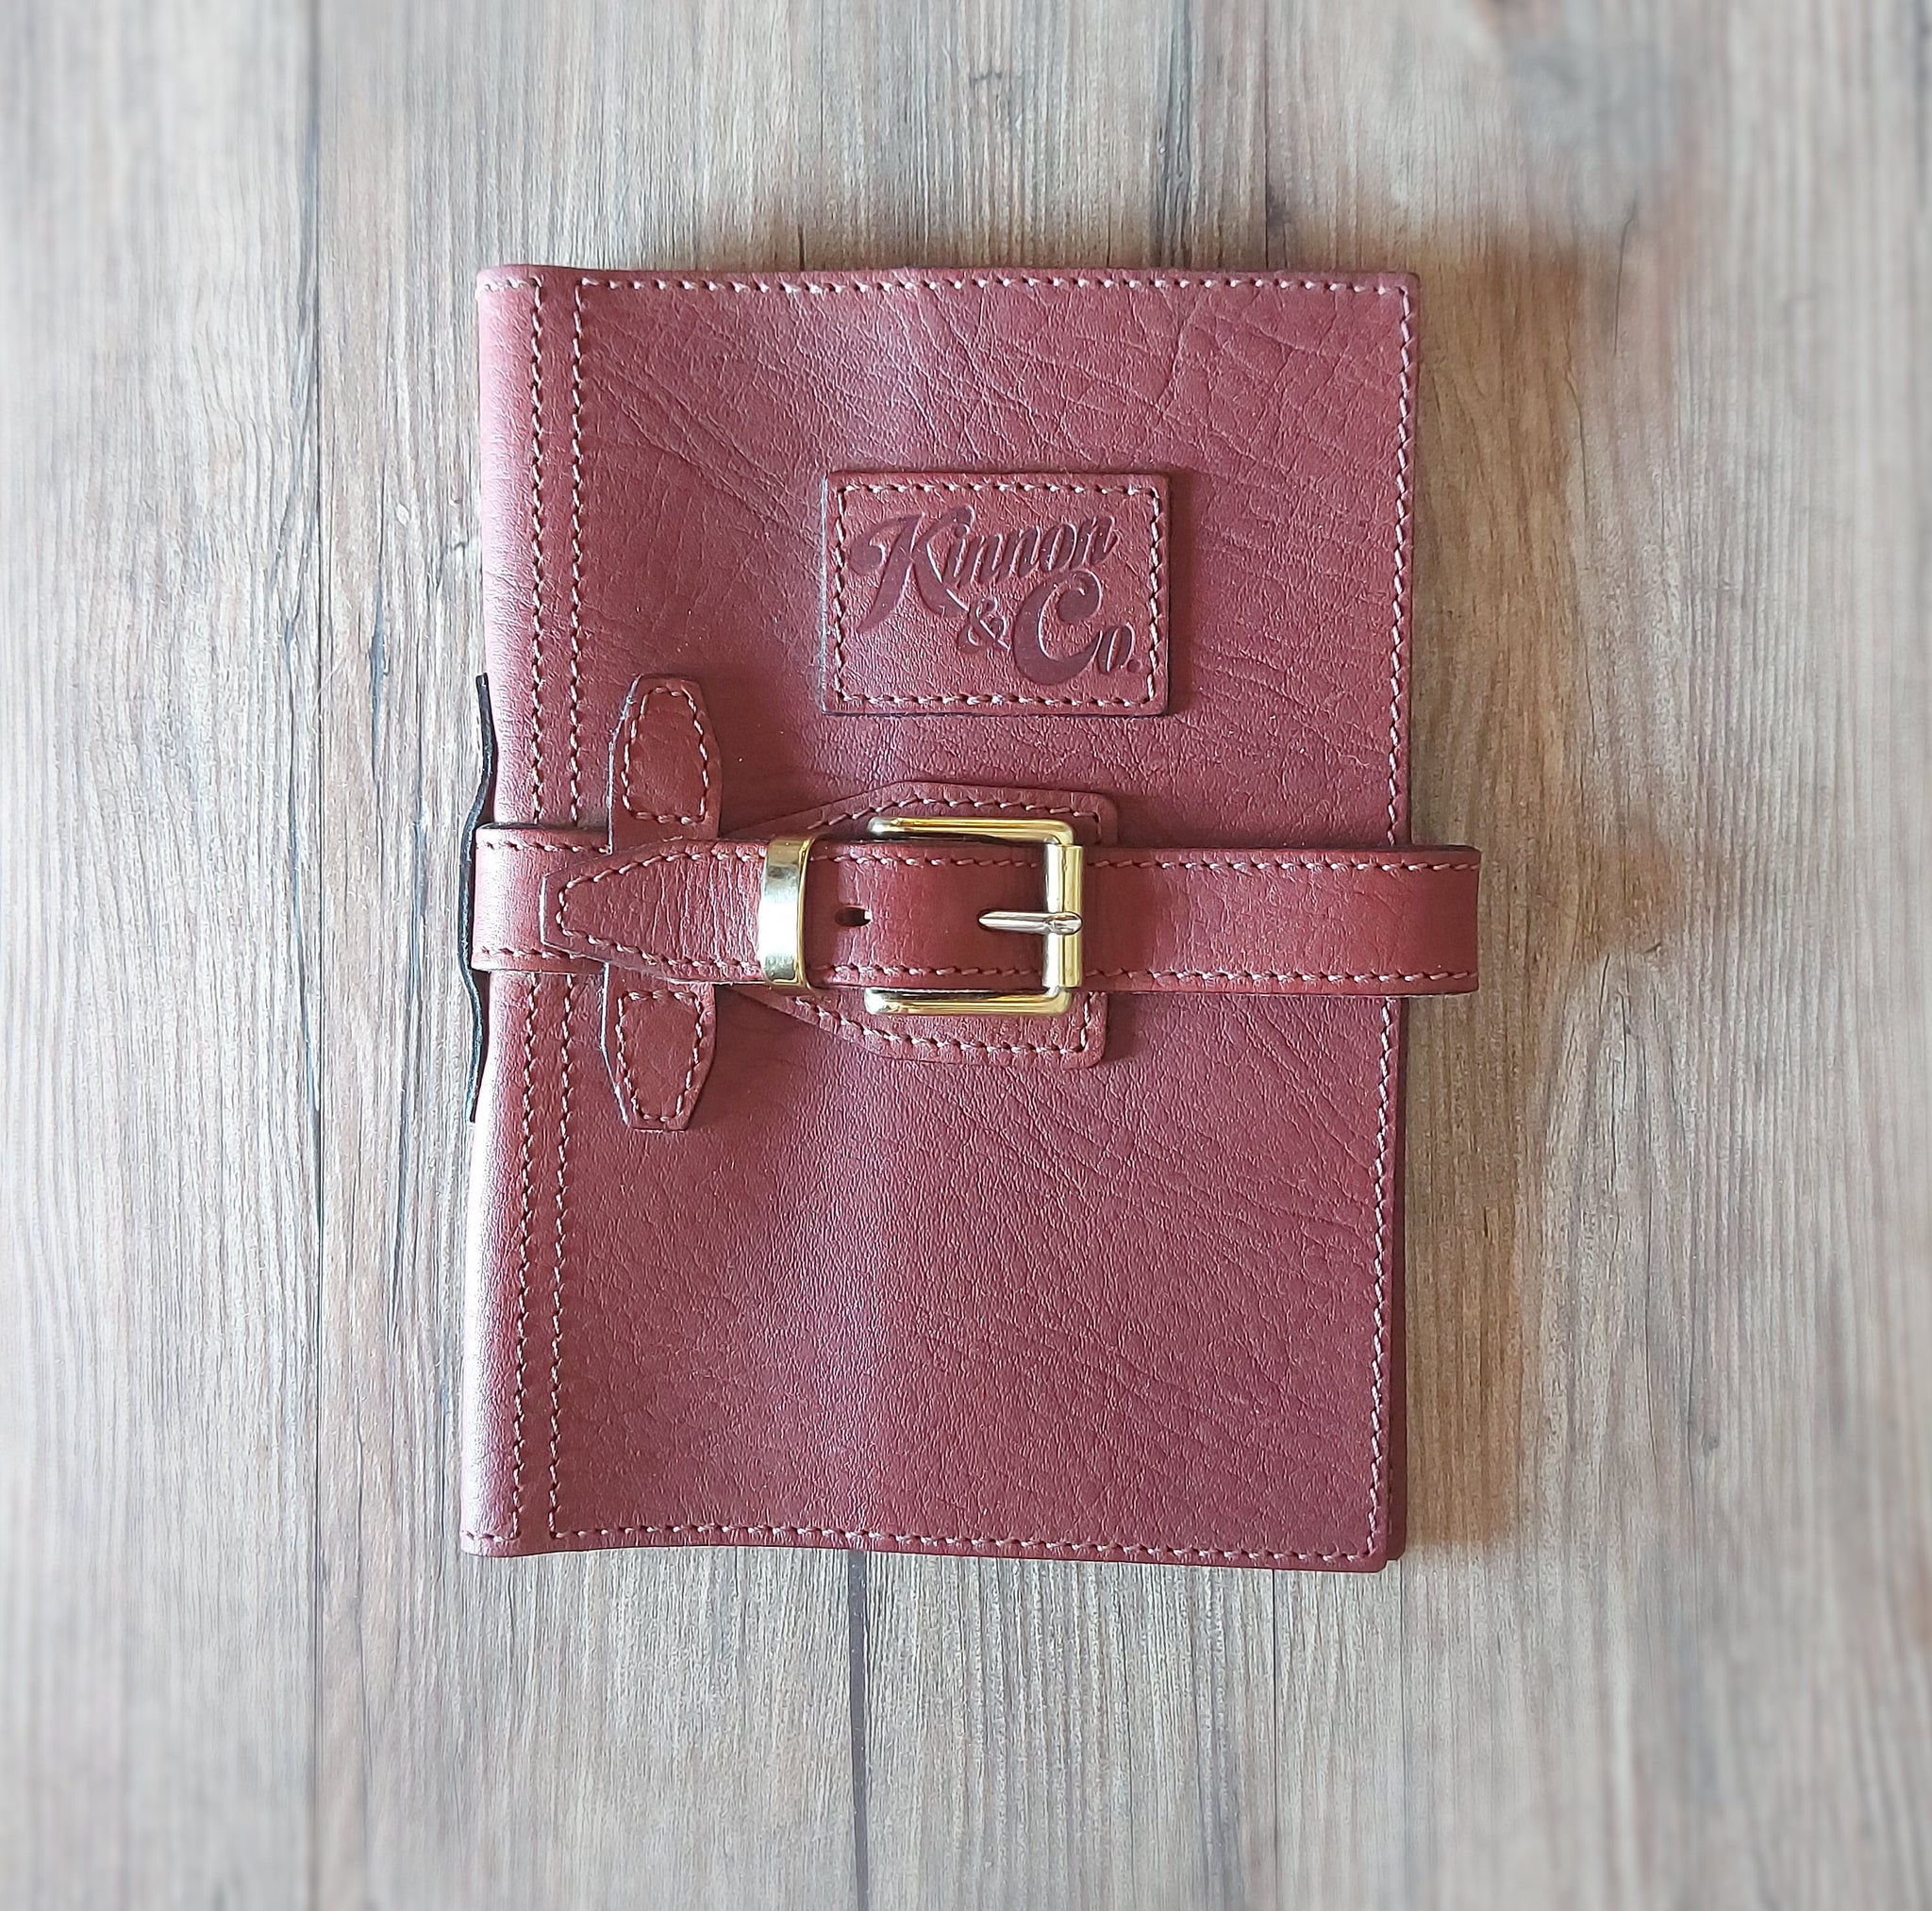 Kinnon and Co branded A5 leather diary cover with strap